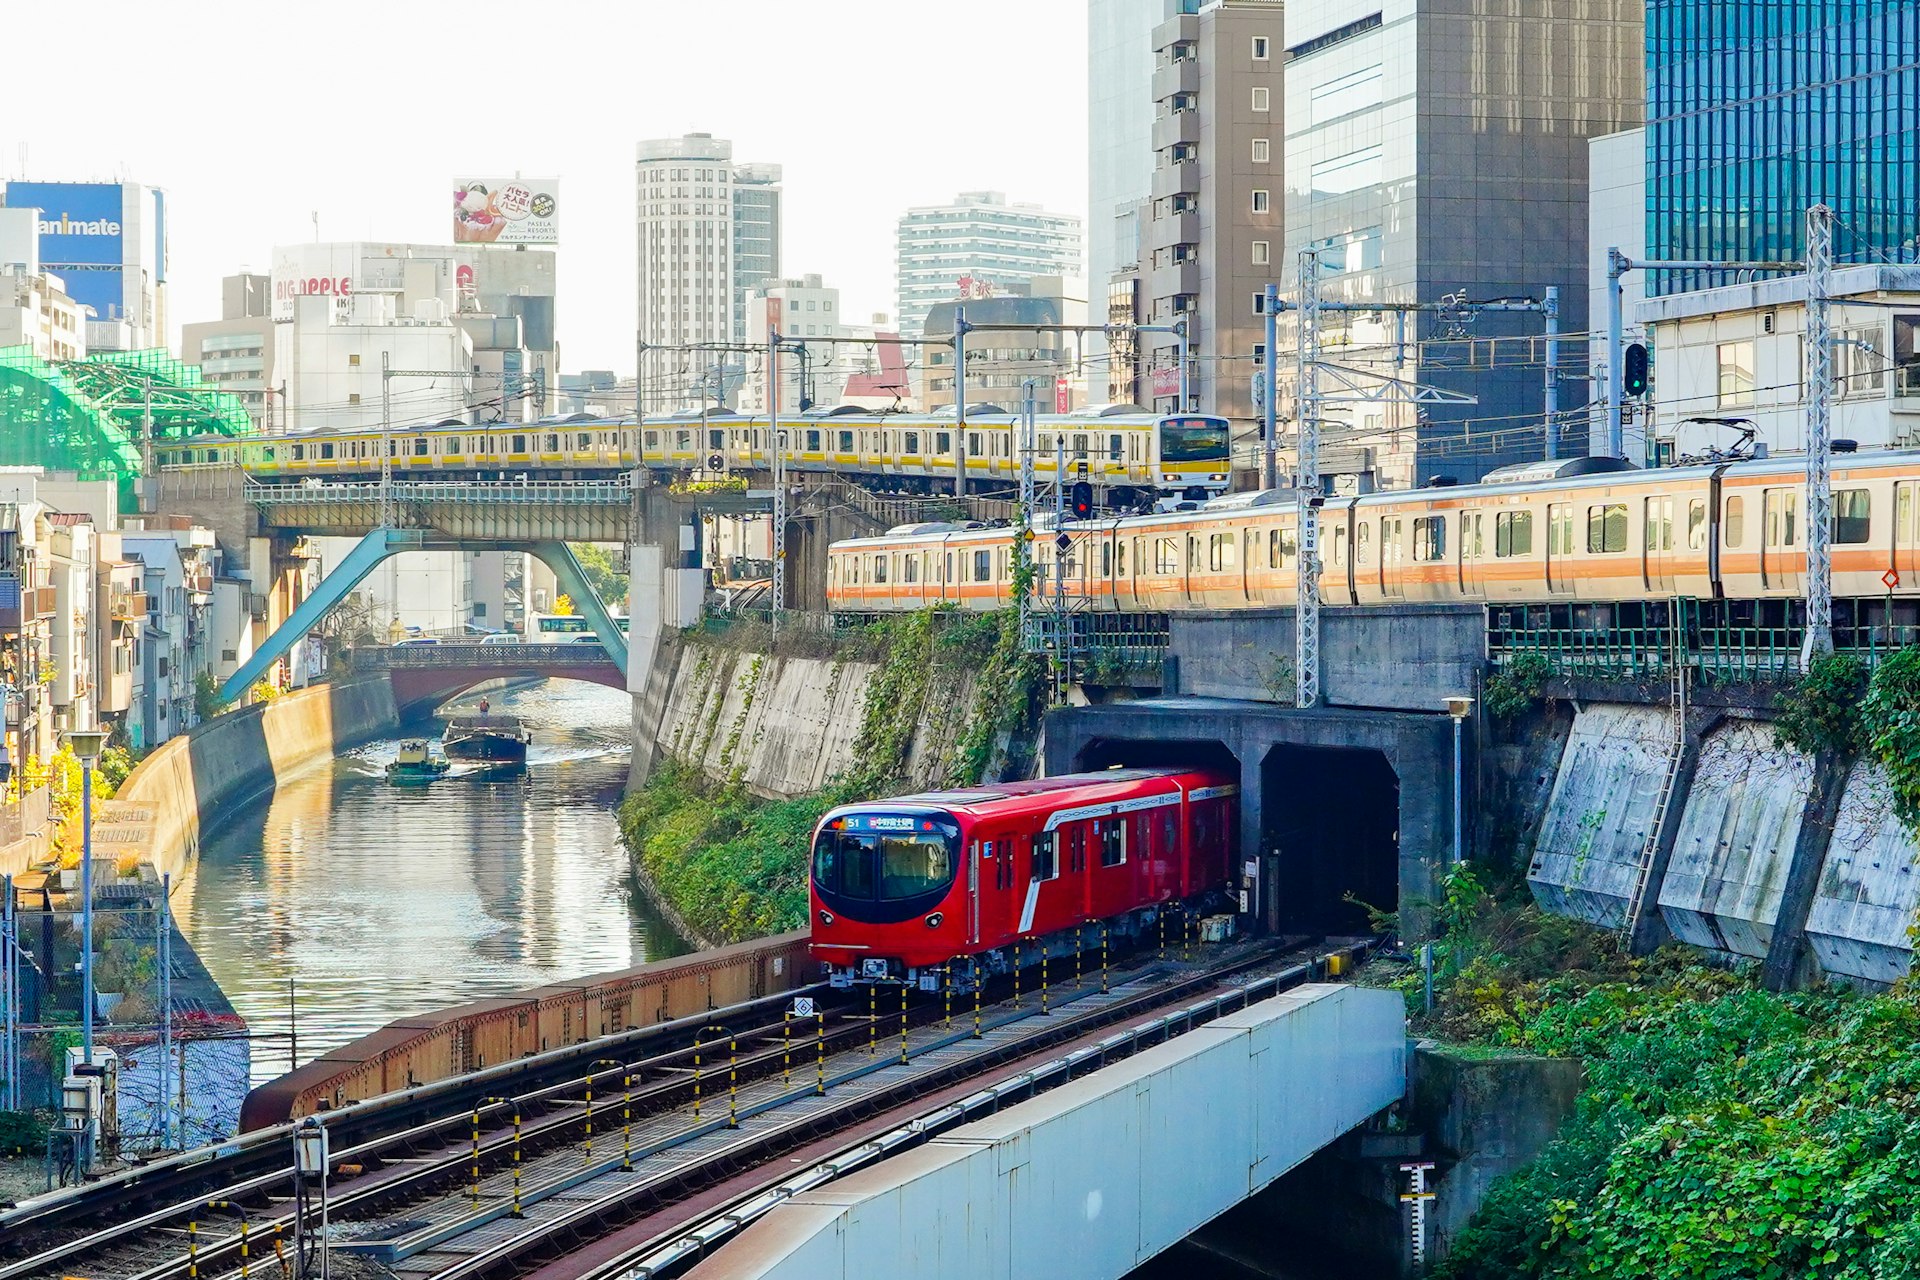 Three different trains cross bridges near each other in a city